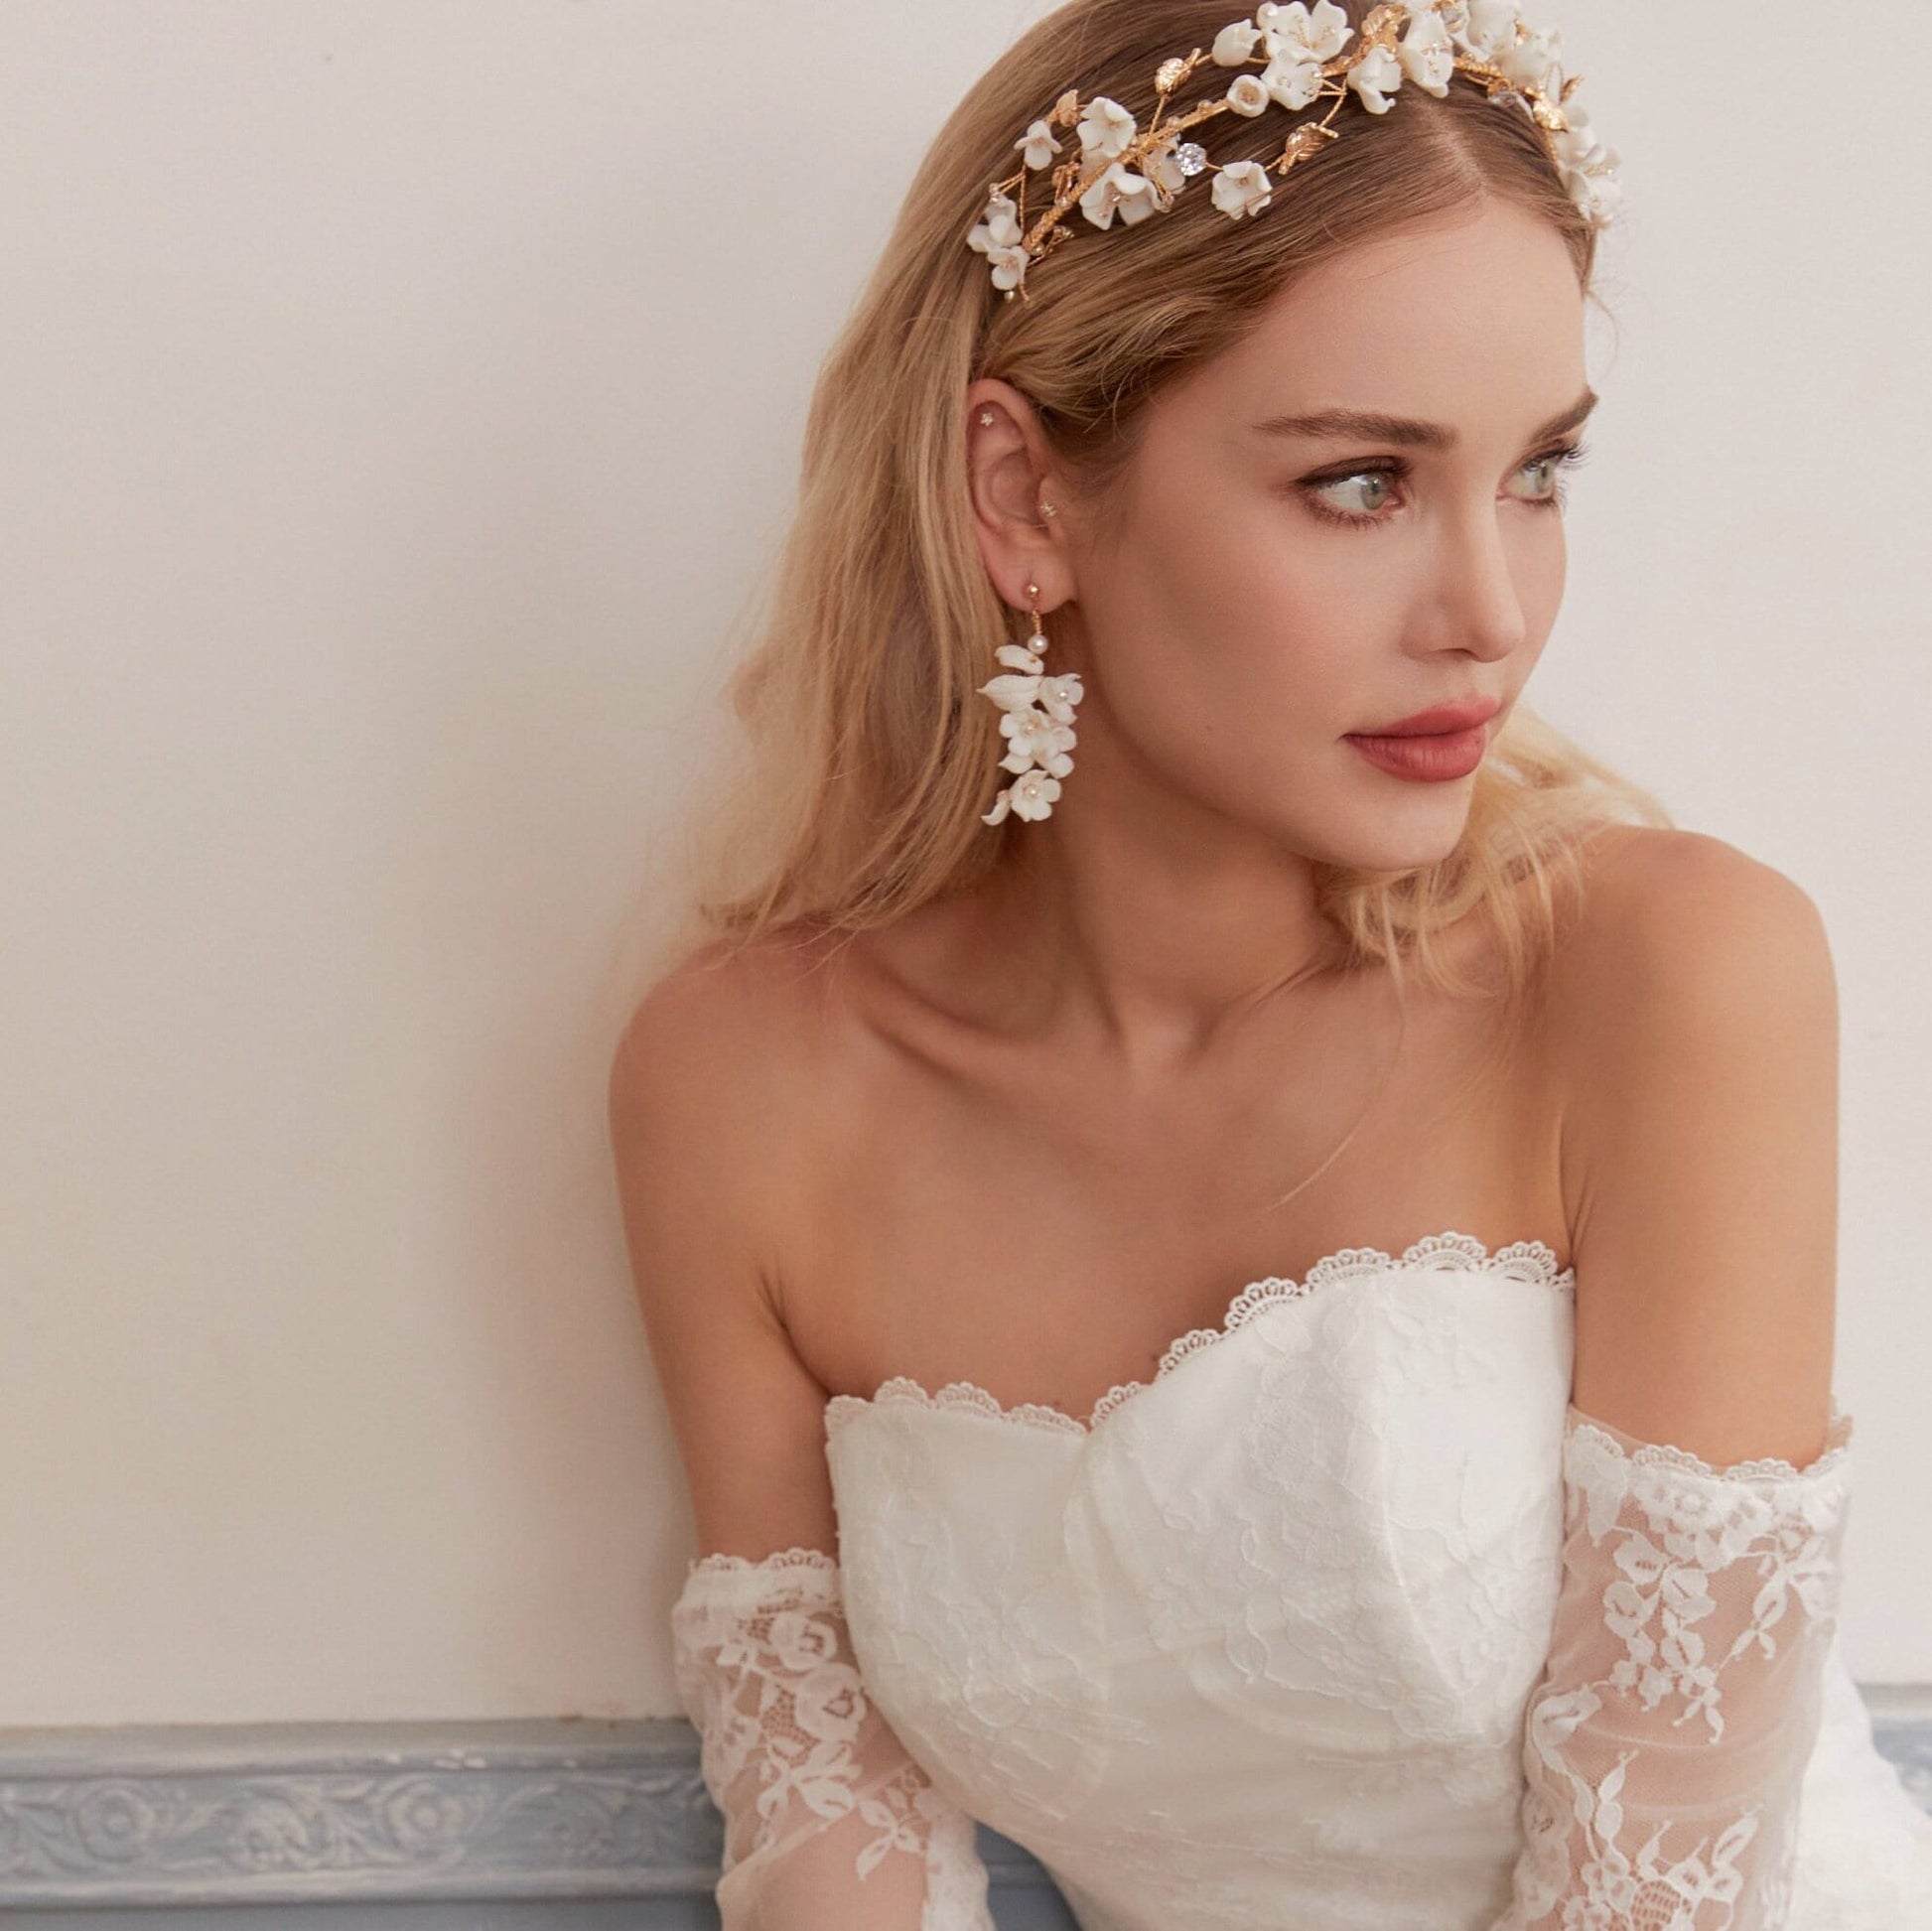 Carefully crafted by hand, these flower bridal earrings are a perfect match to our porcelain headpieces. Each earring features delicate white clay flowers and leaves adorned with shimmering freshwater pearls. These earrings have a long drop design that is sure to catch attention and make a statement.